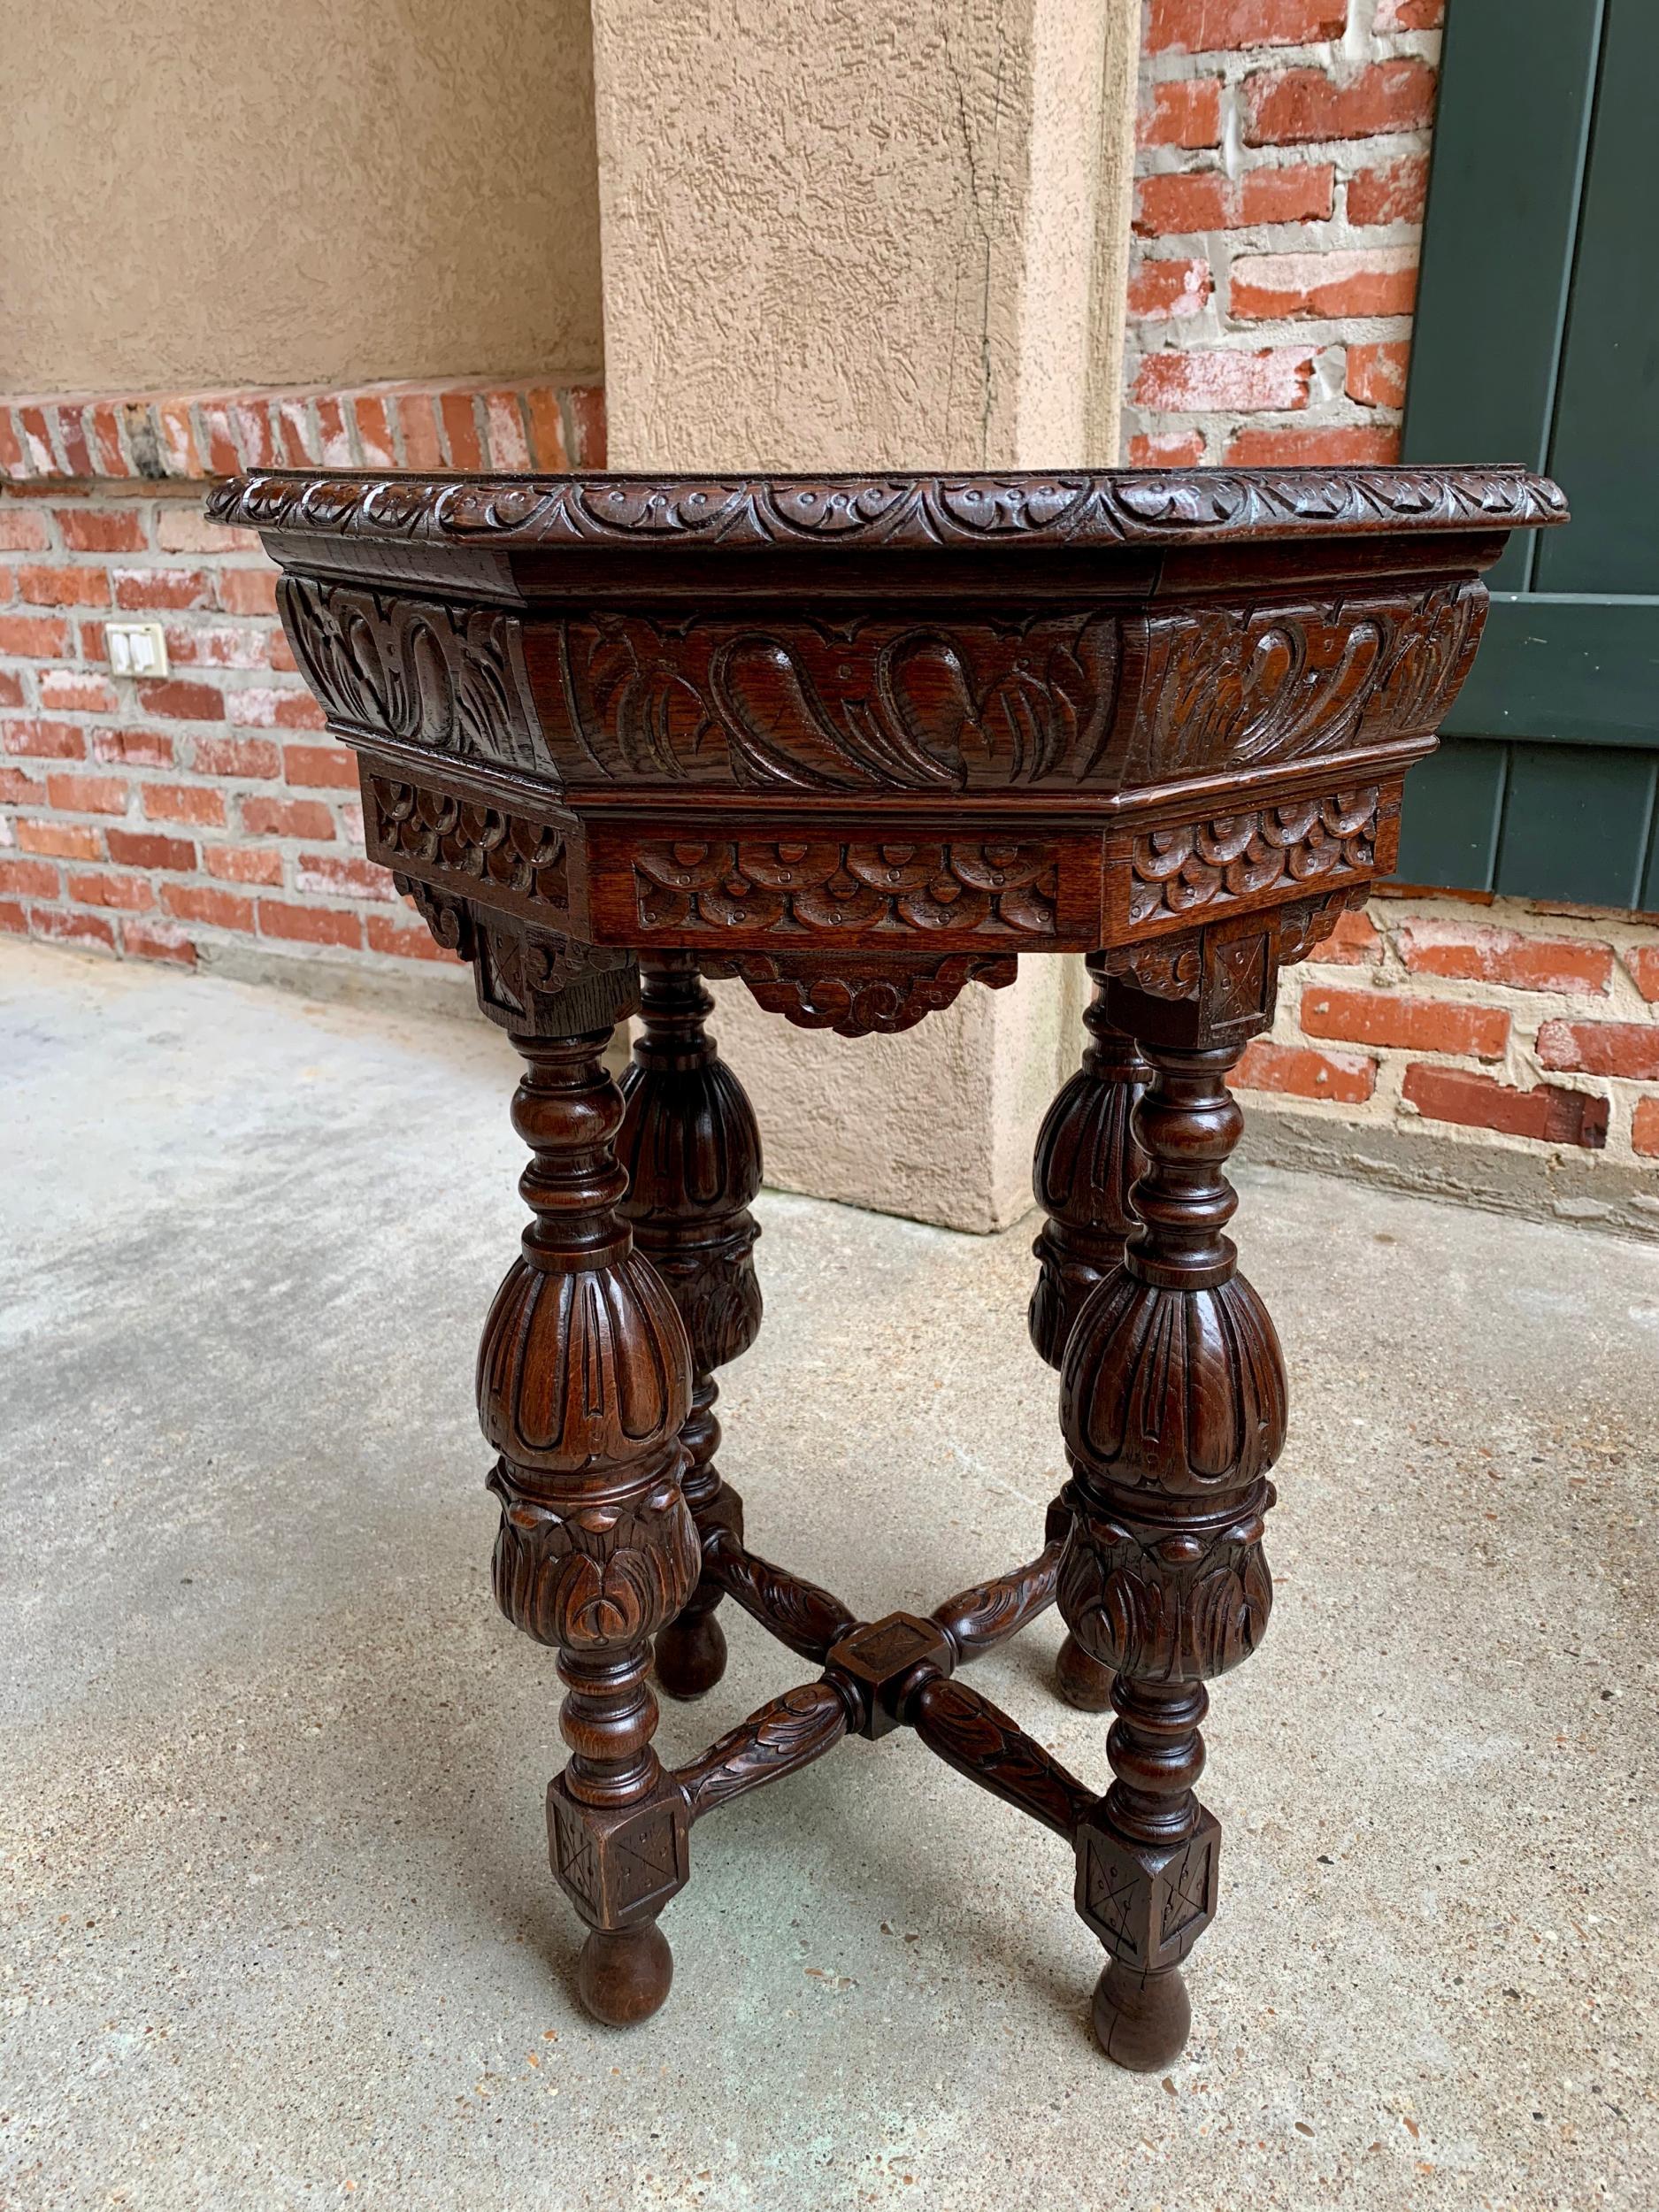 Petite antique French carved oak octagon center table side end renaissance

~ Direct from France
~ Super petite size, very rare, but ornately adorned, just like the full size version, with an impressive silhouette and commanding design!
~ Thick,